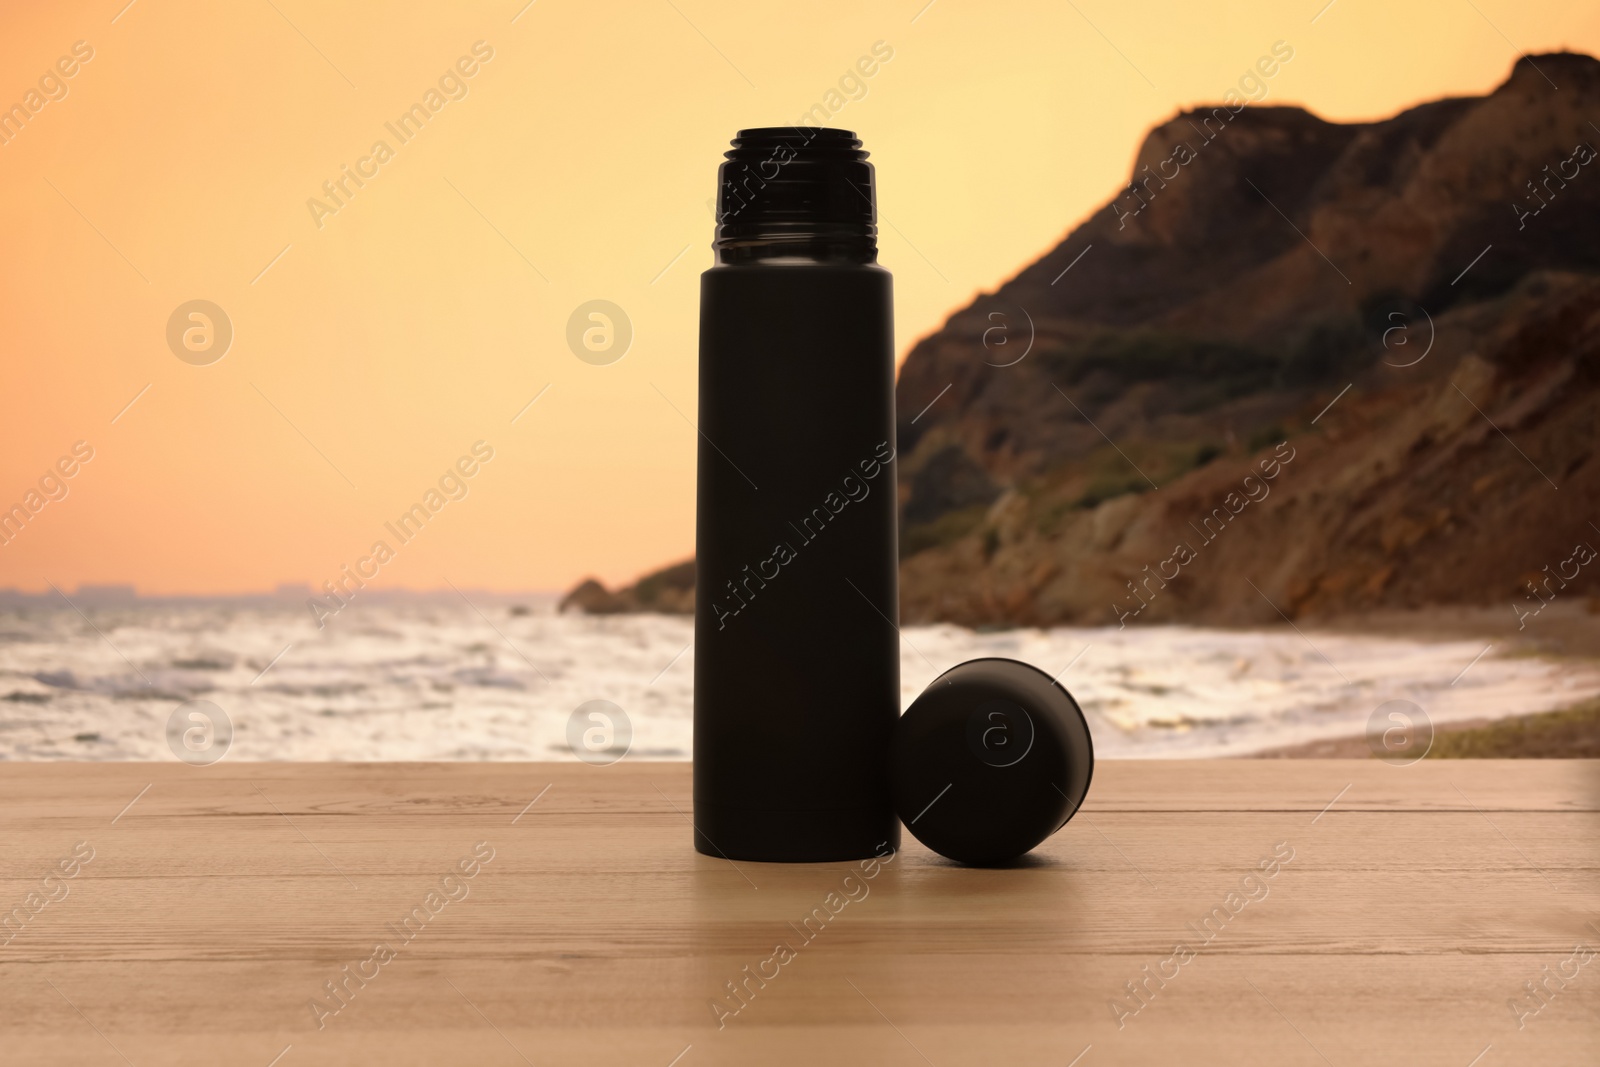 Image of Thermos on wooden table near sea at sunset